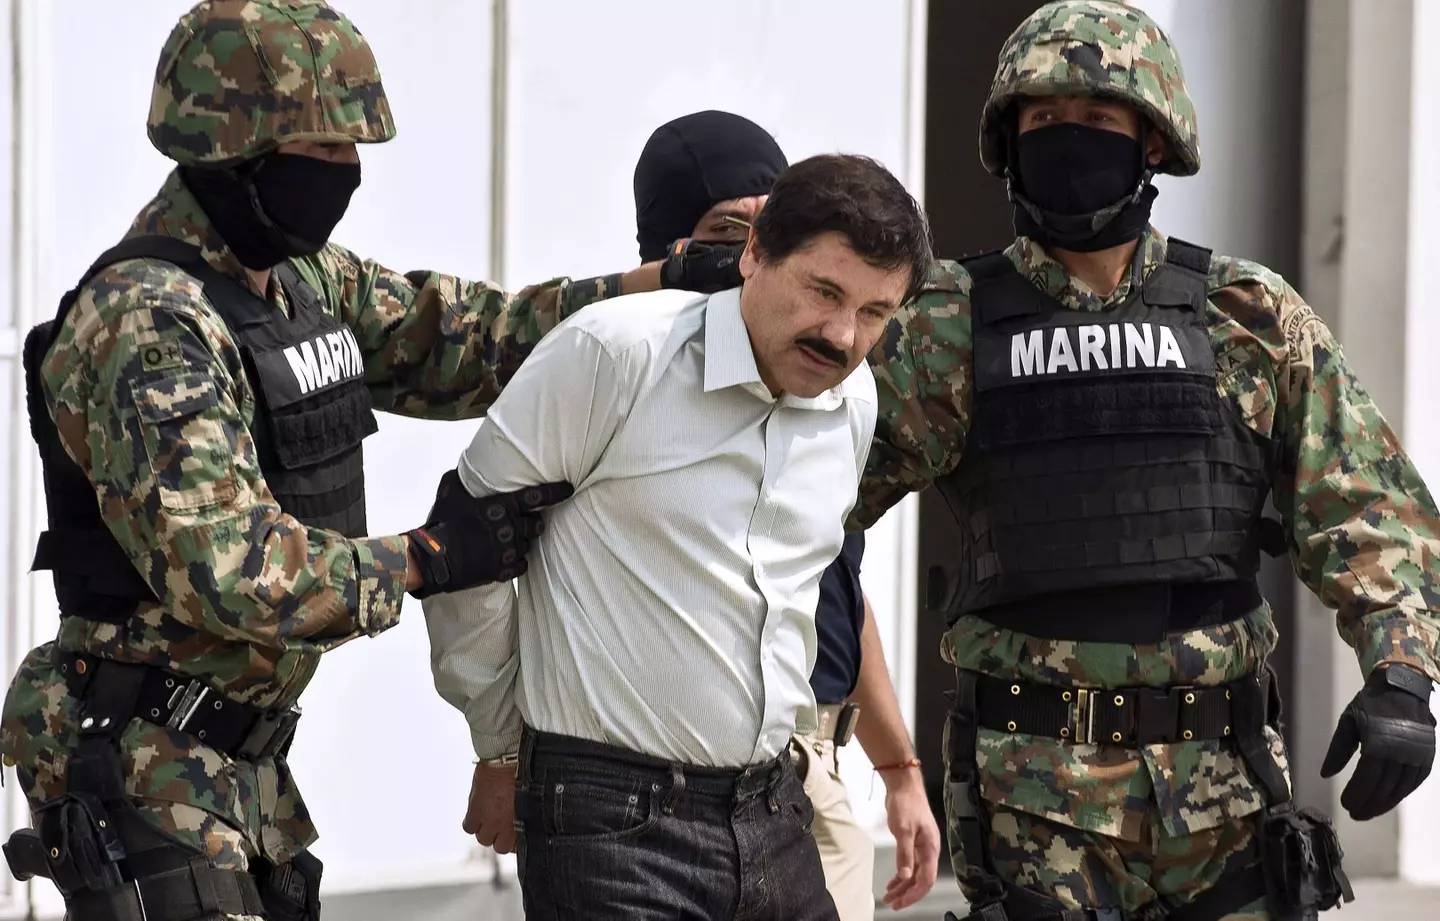 El Chapo is currently serving life in prison.